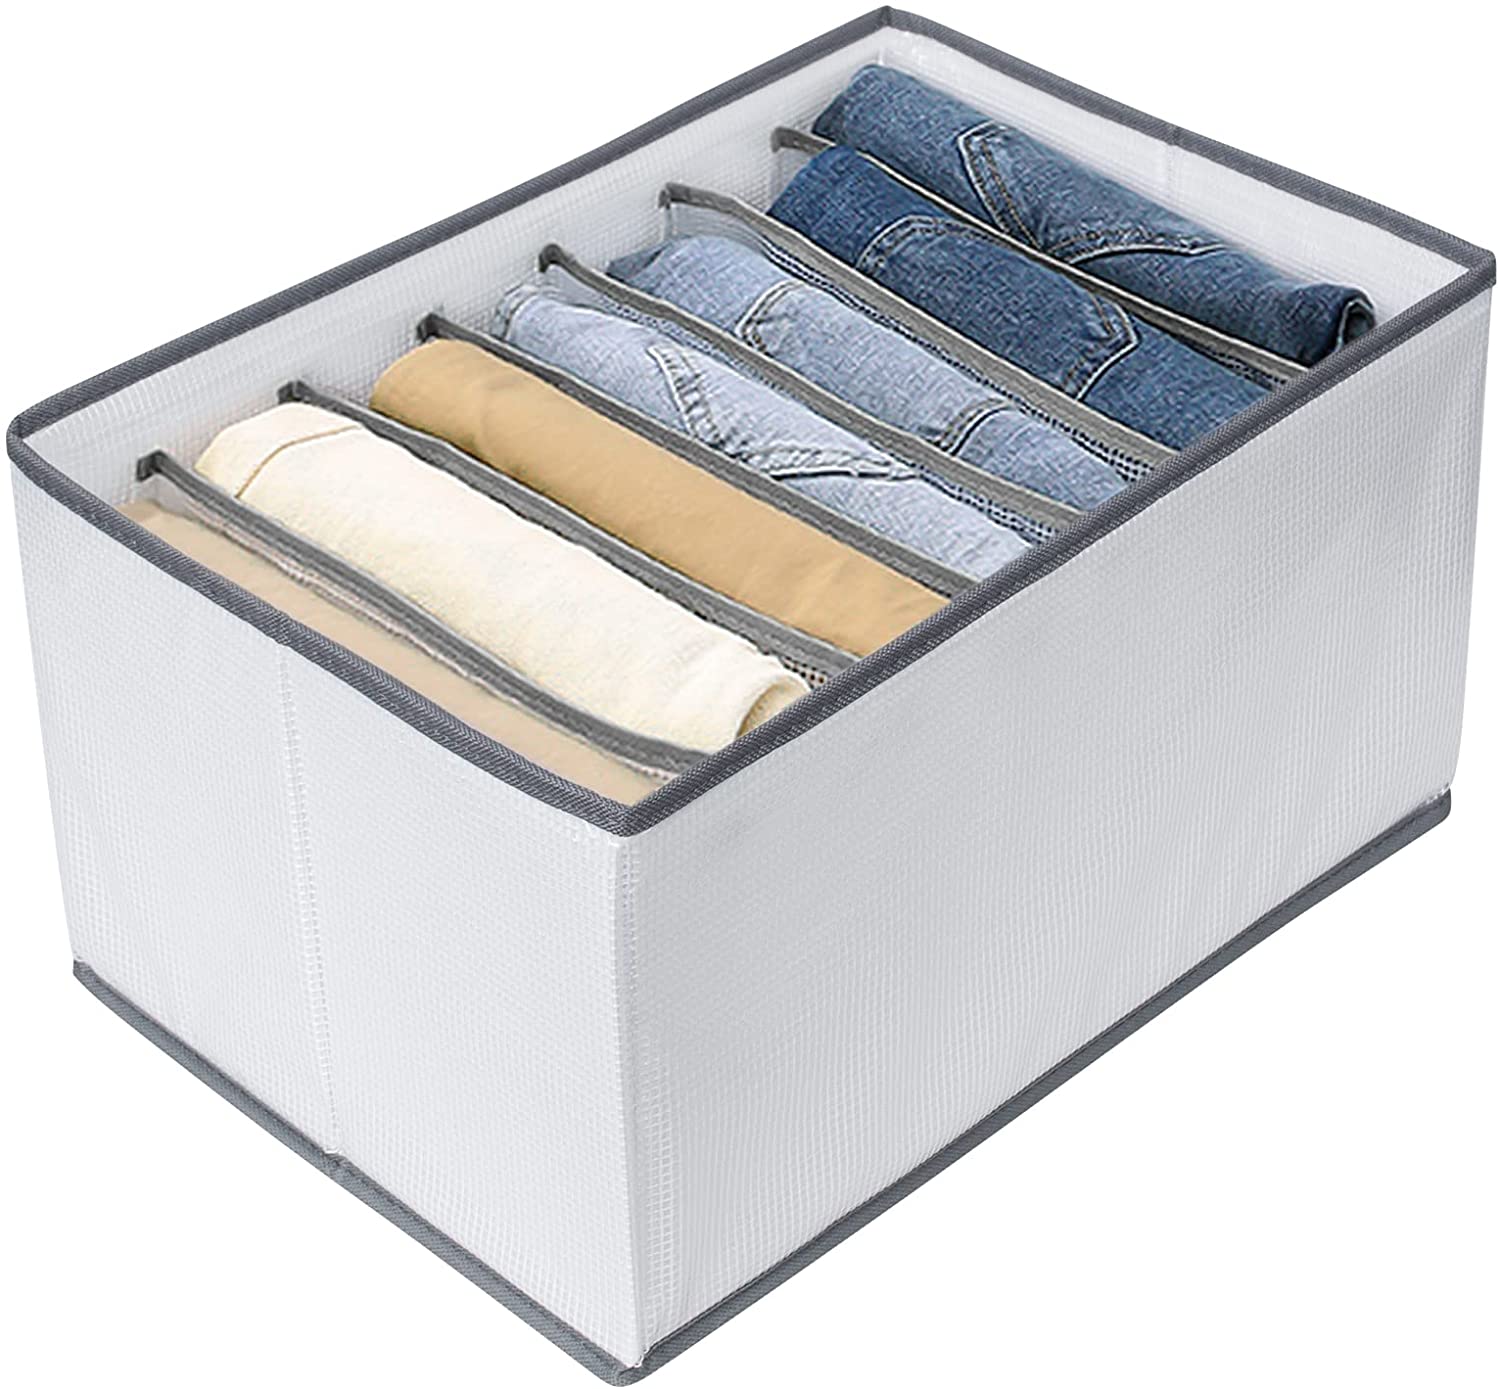 Lenlang Clothes Organizer with 7 Compartments